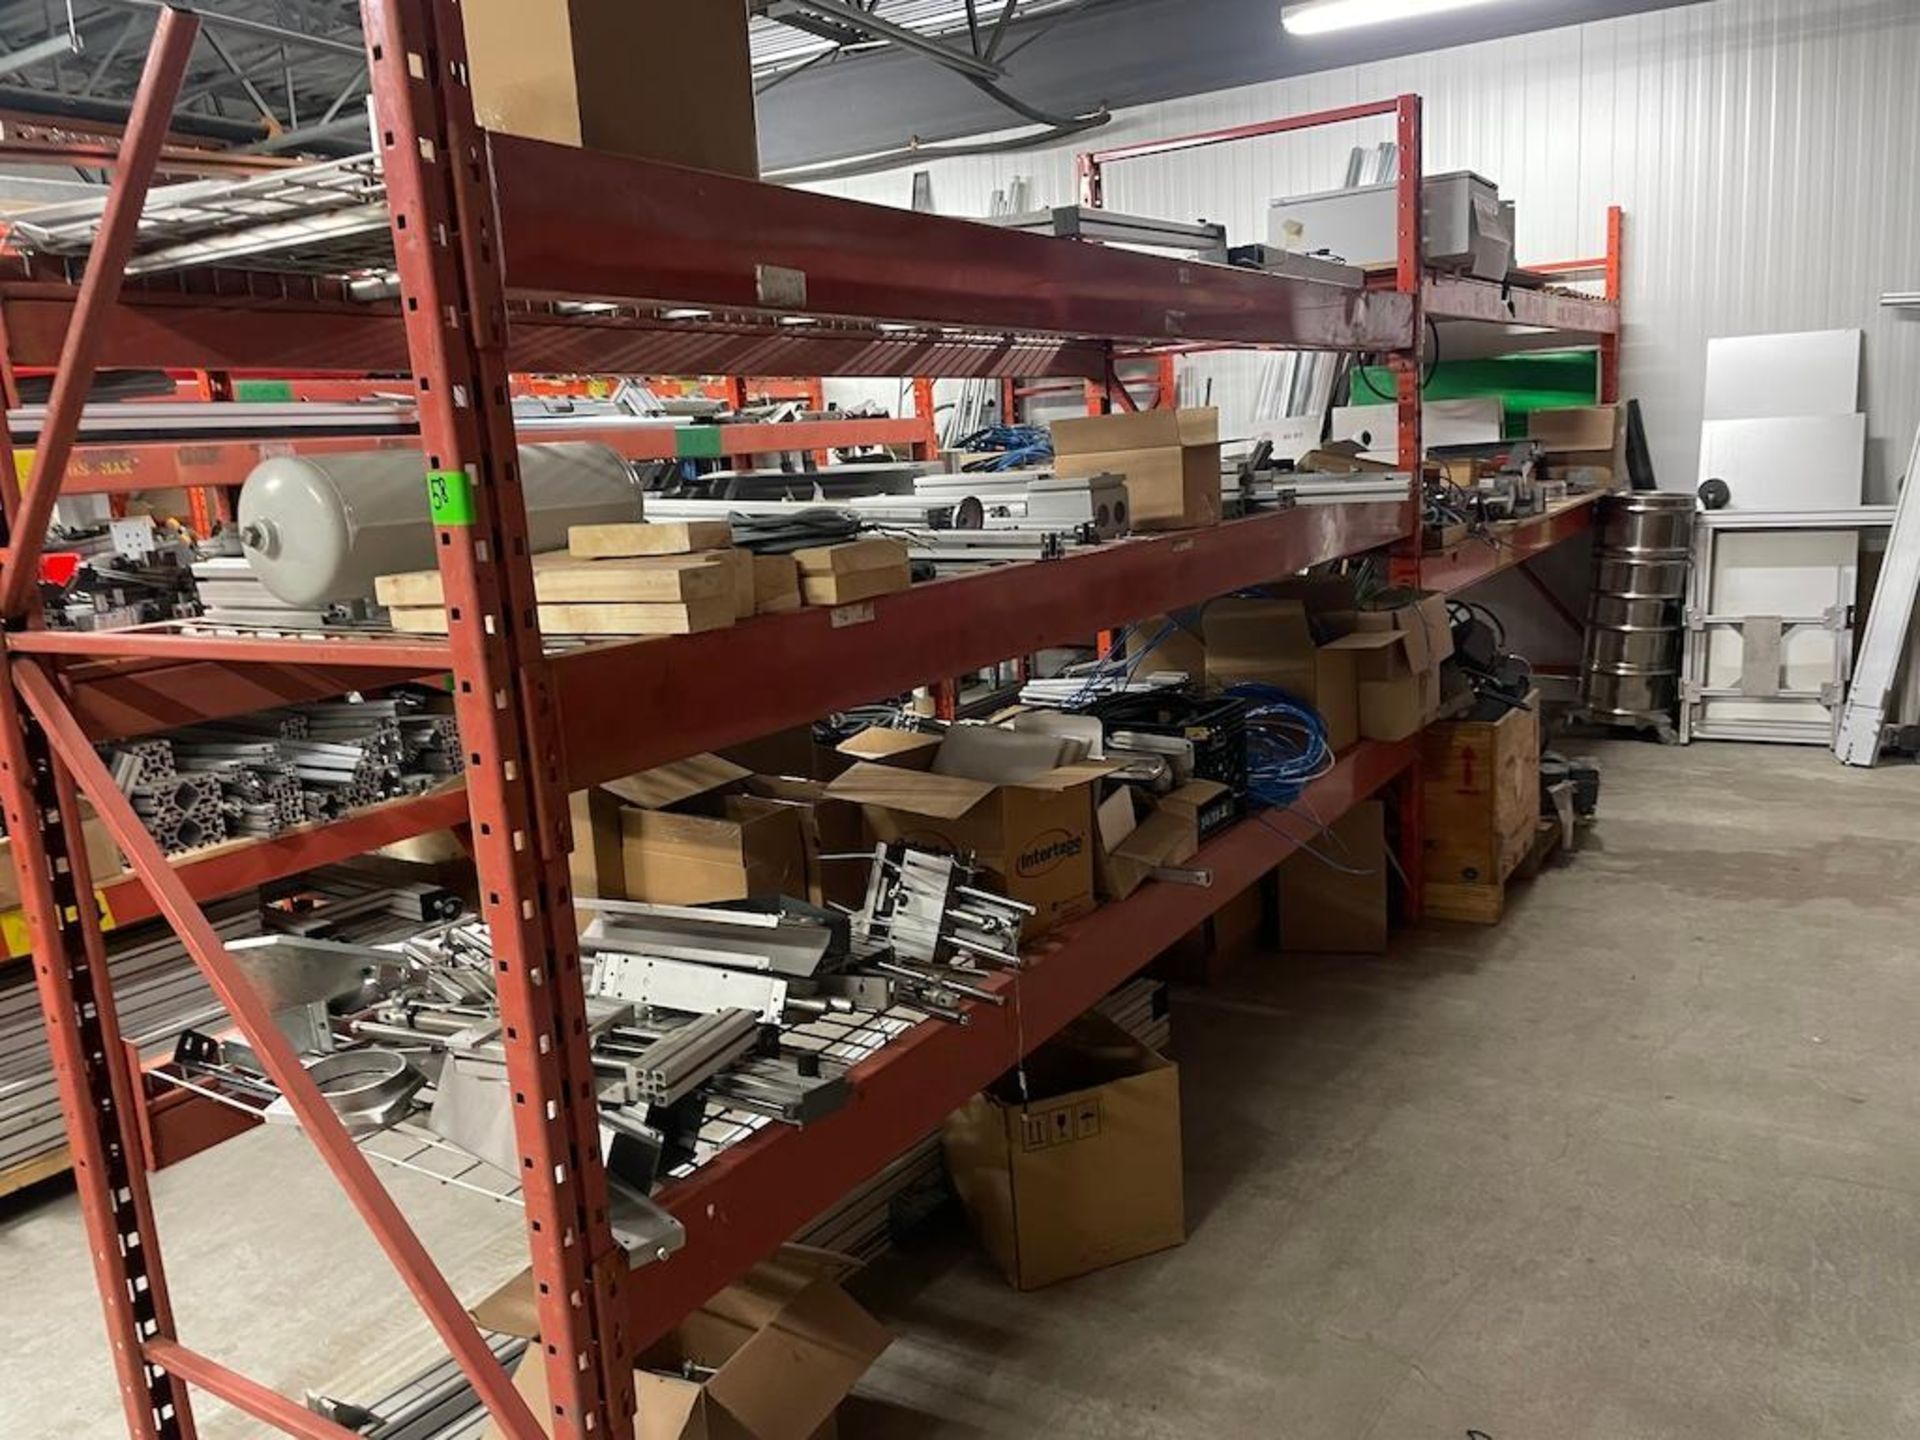 LOT STORES INVENTORY ROOM ON SECOND LEVEL, INCLUDING ALL PARTS, WIRING, FRAMING, CONTROL BOXES, 15 S - Image 13 of 16